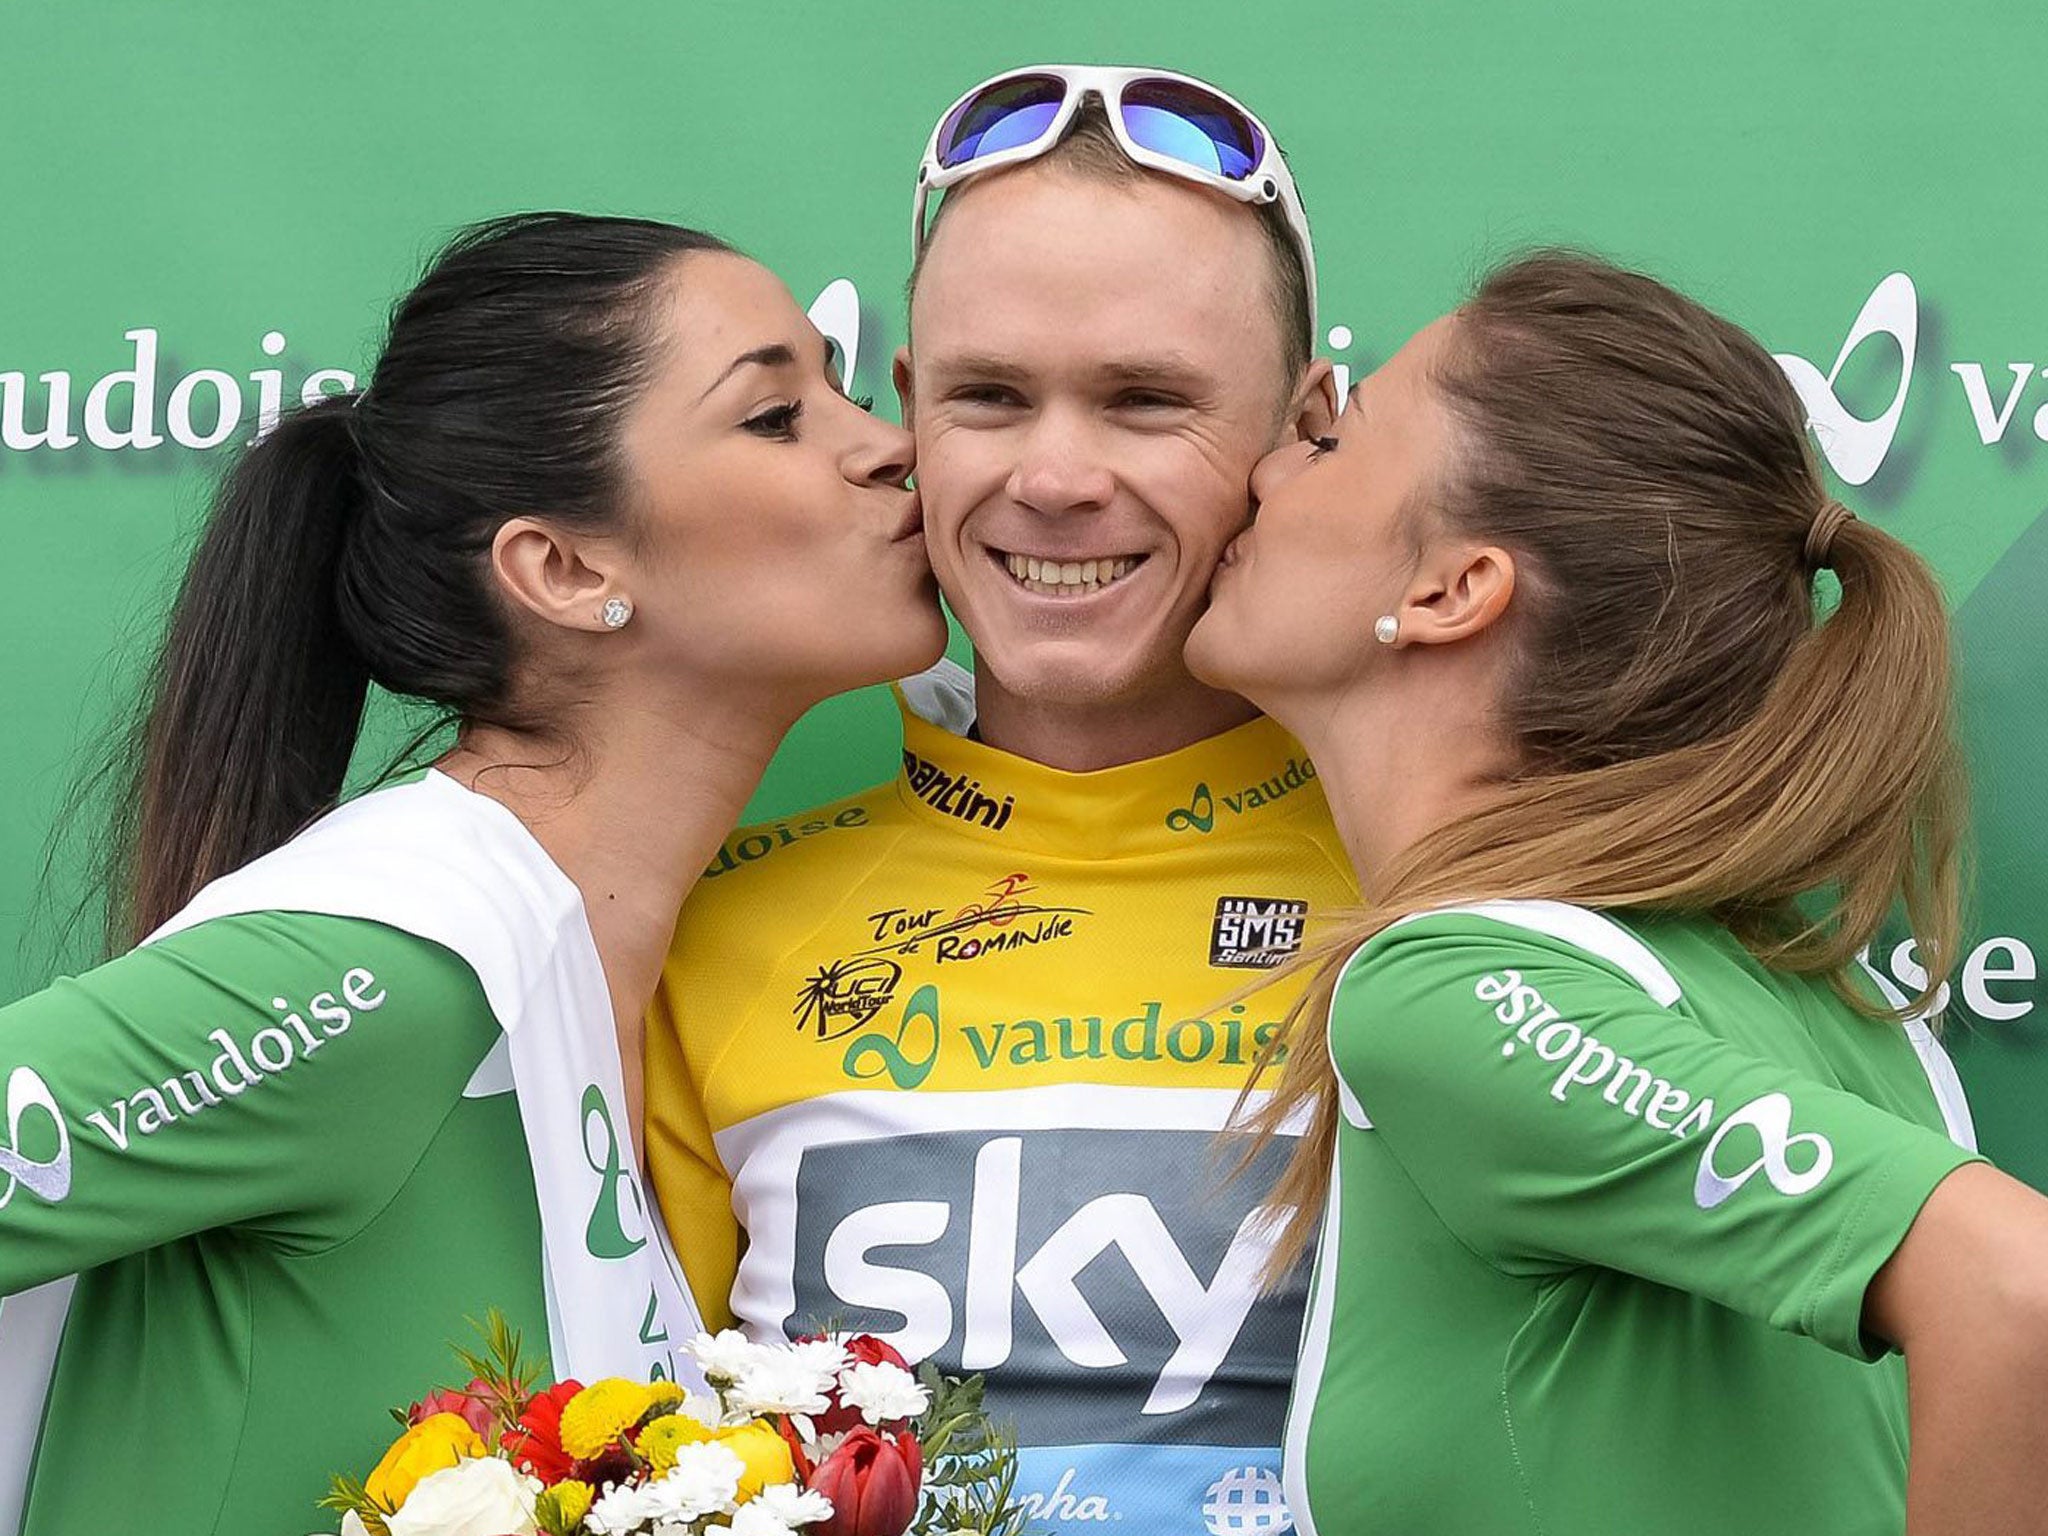 The winner of the 67th Tour de Romandie British Christopher Froome of team Sky Procycling, celebrates on the podium during the 5th and last stage, a 18,7 km race against the clock, at the 67th Tour de Romandie UCI ProTour